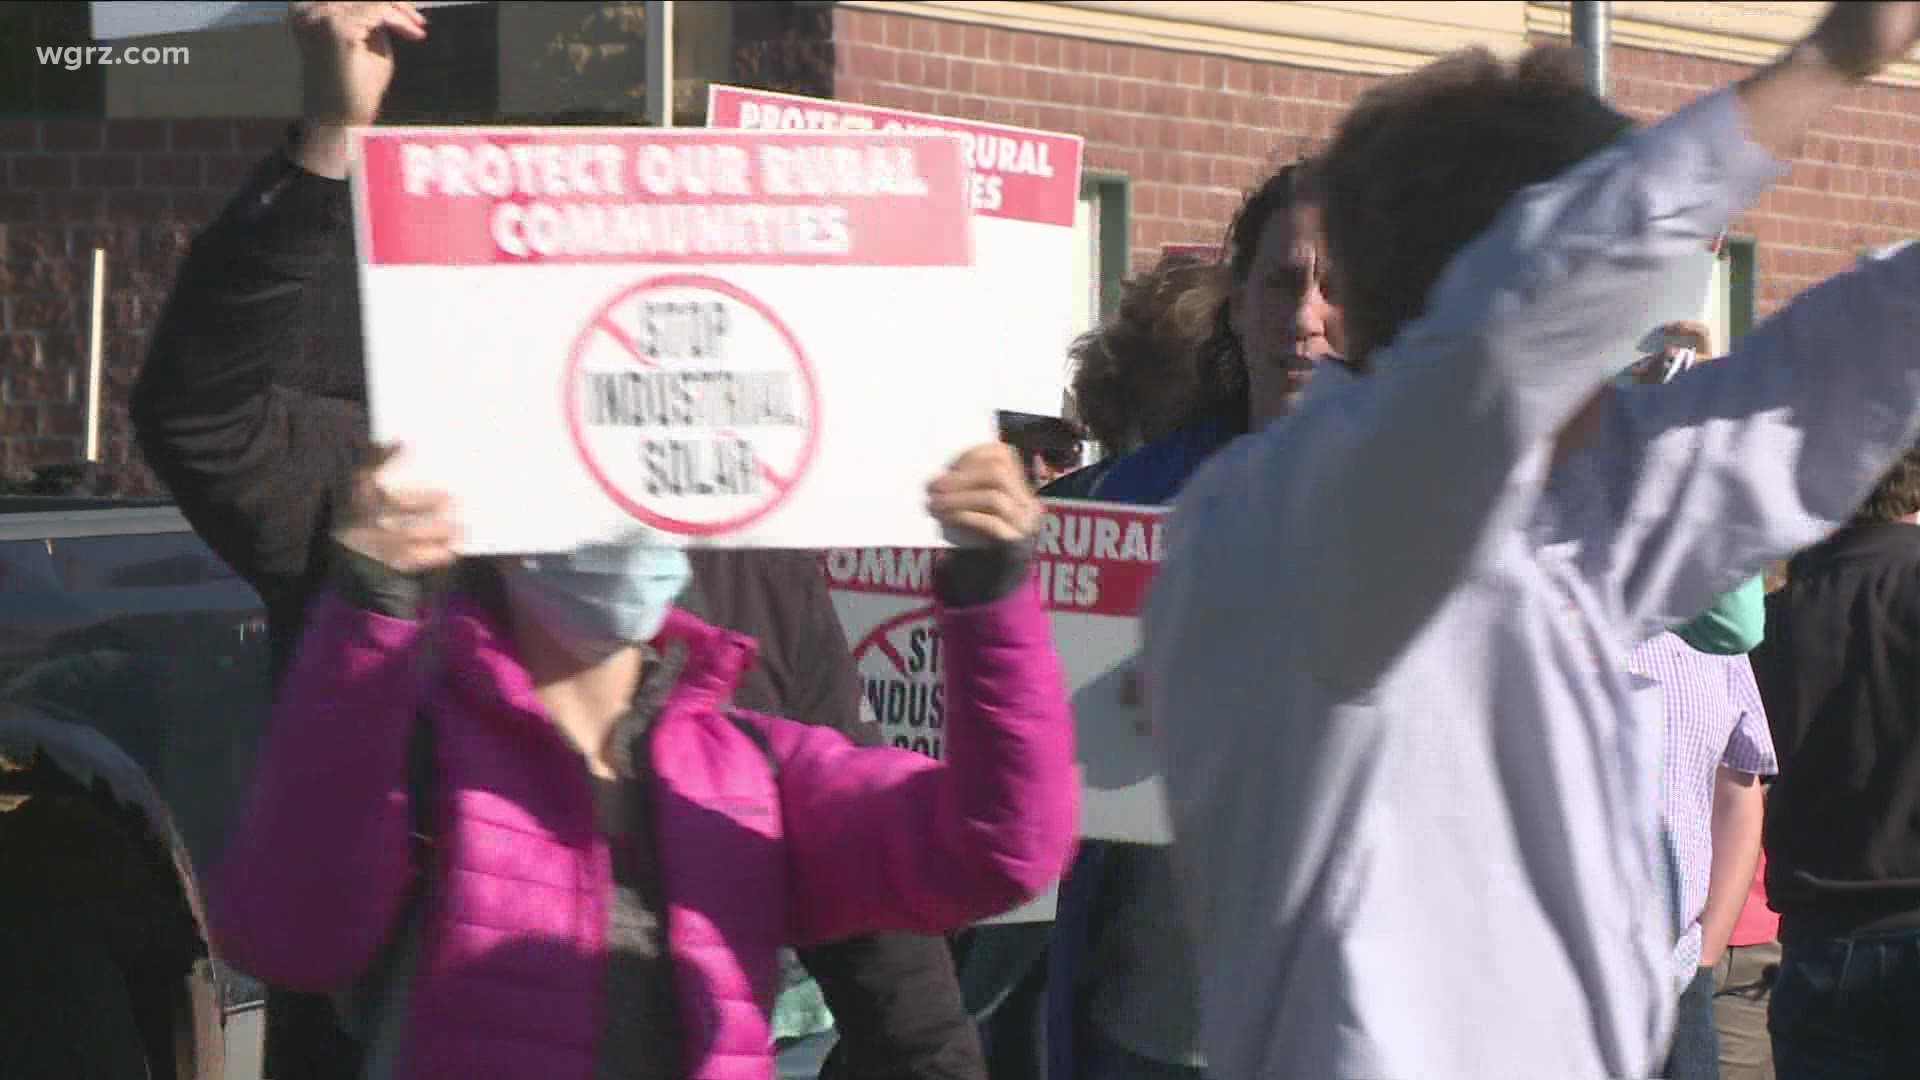 Residents oppose the Niagara County project and say their voices have not been heard throughout the process.